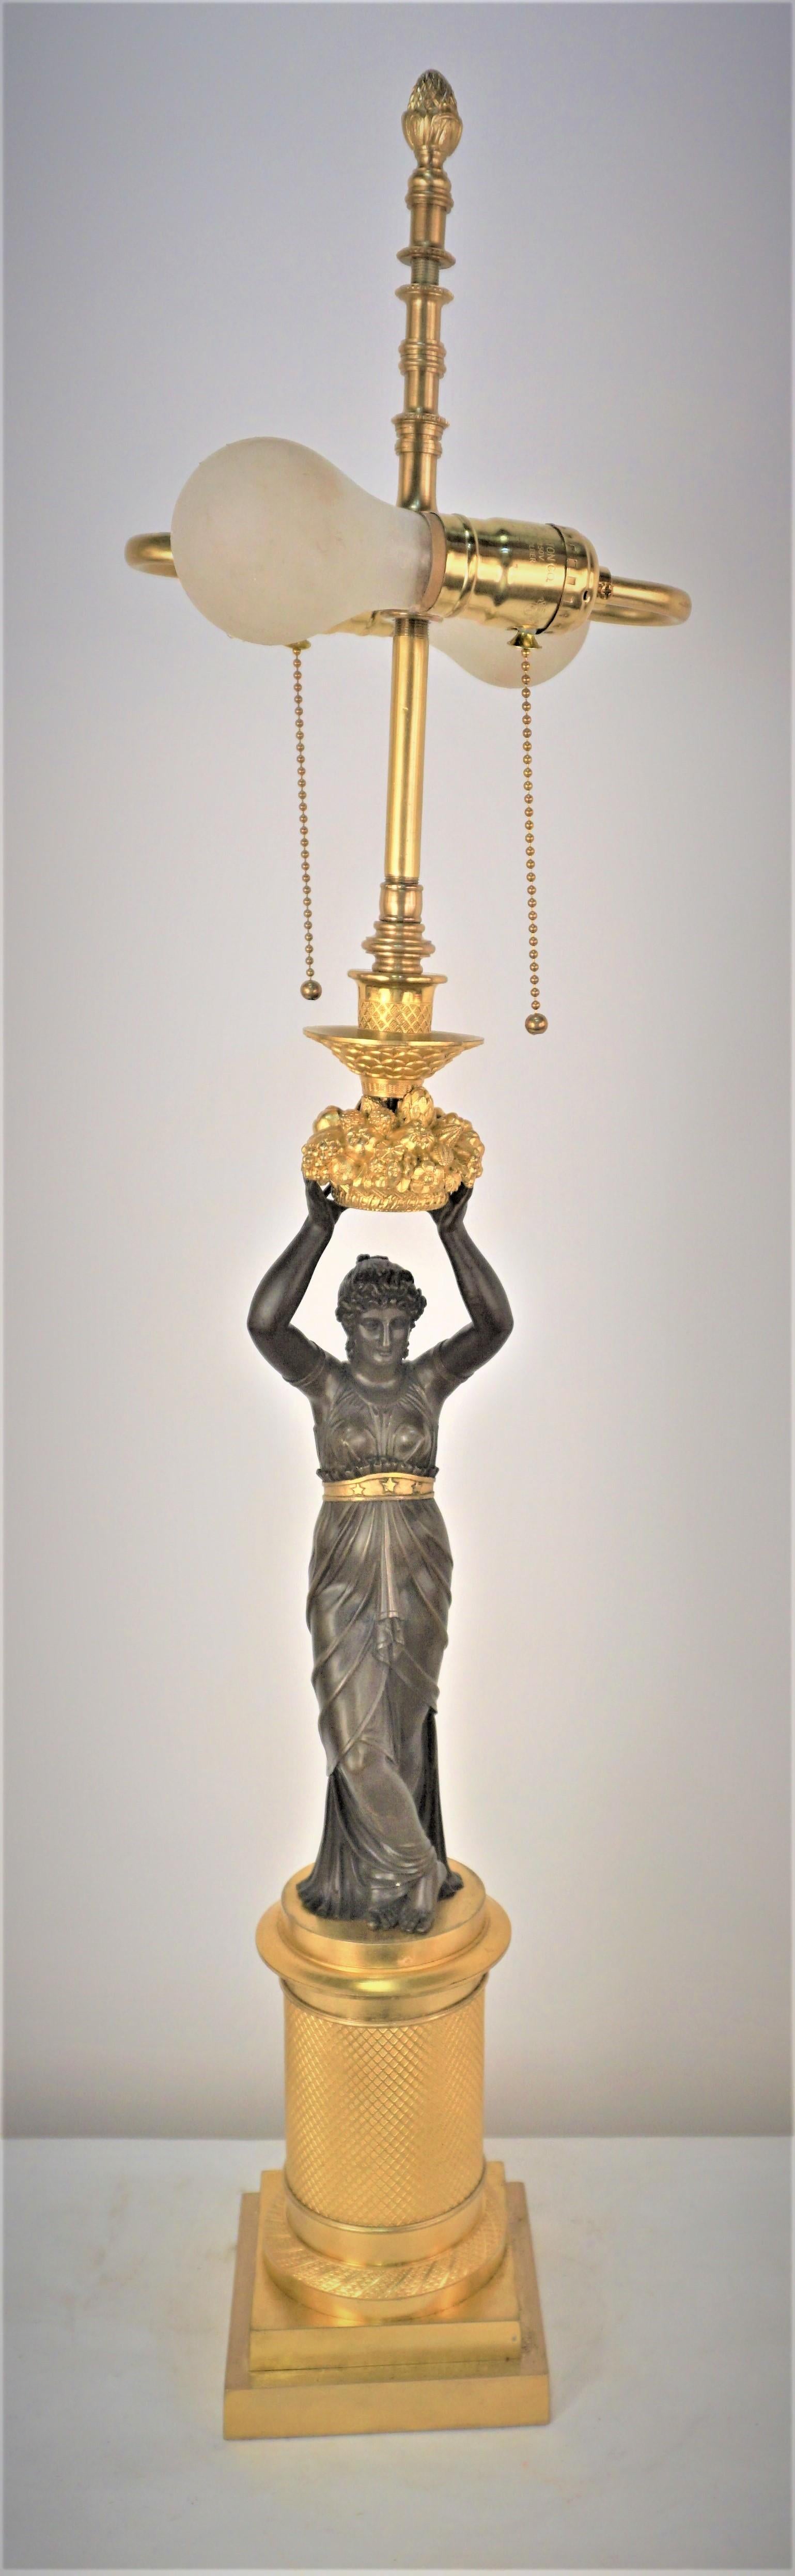 French 19th Century Gilt bronze Table/Desk Lamp For Sale 4